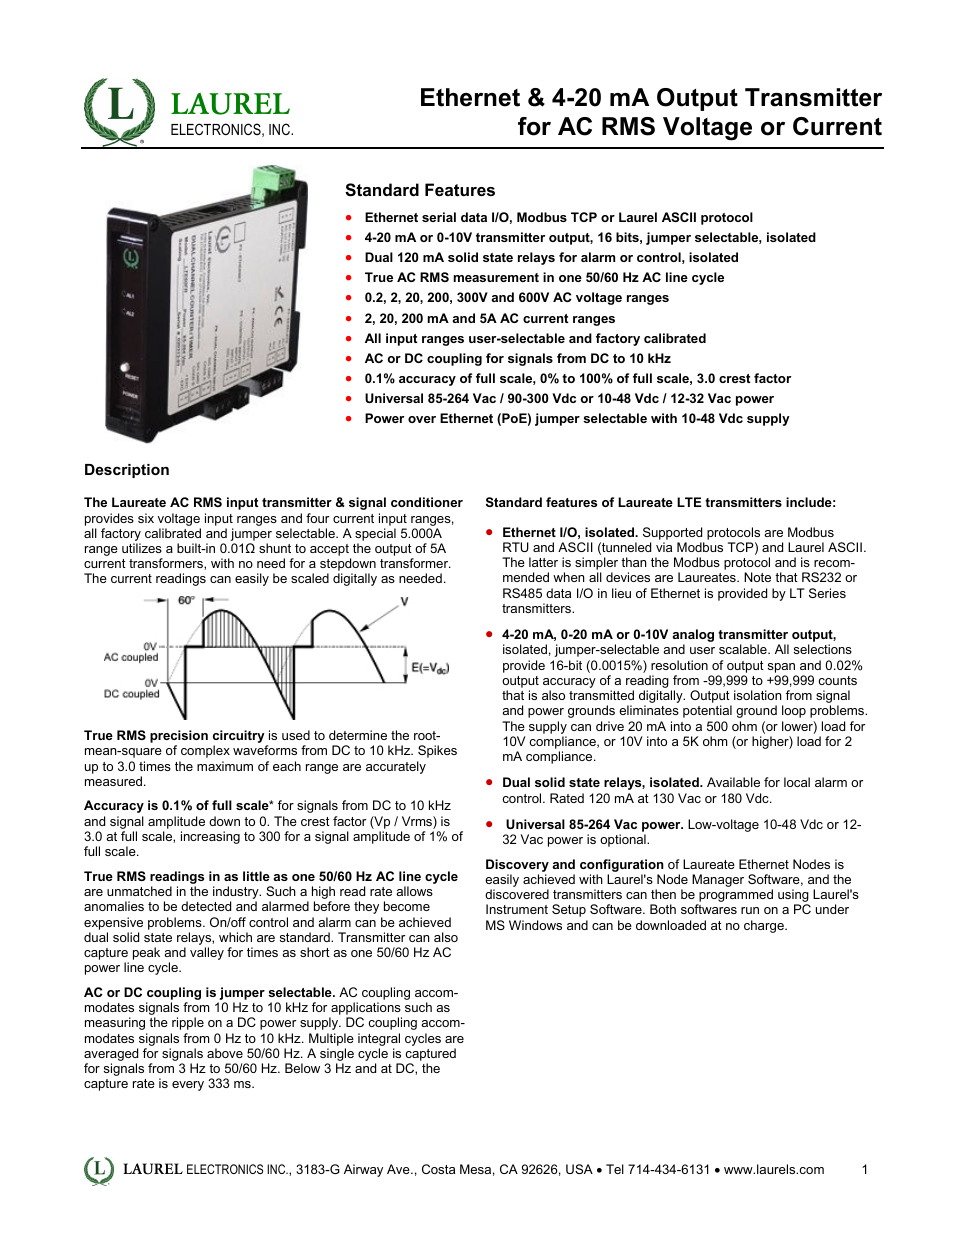 LTE: Ethernet & 4-20 mA Output Transmitter for AC RMS Voltage or Current